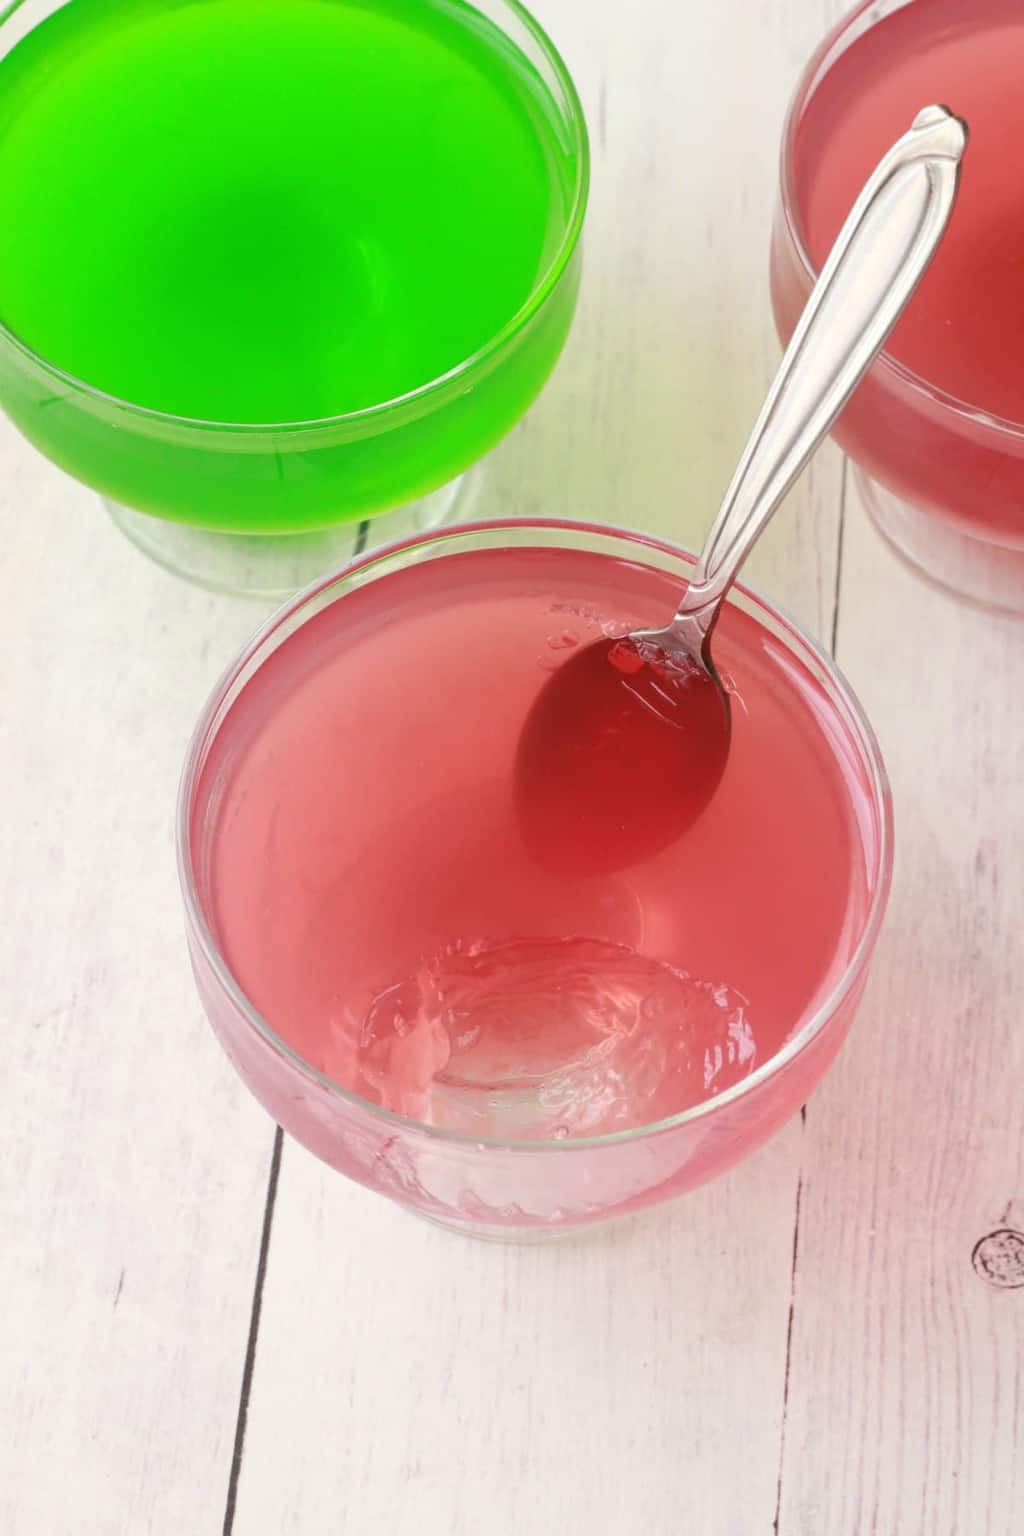 Vegan Jello in fun and fruity red and green colors in glass dishes. 